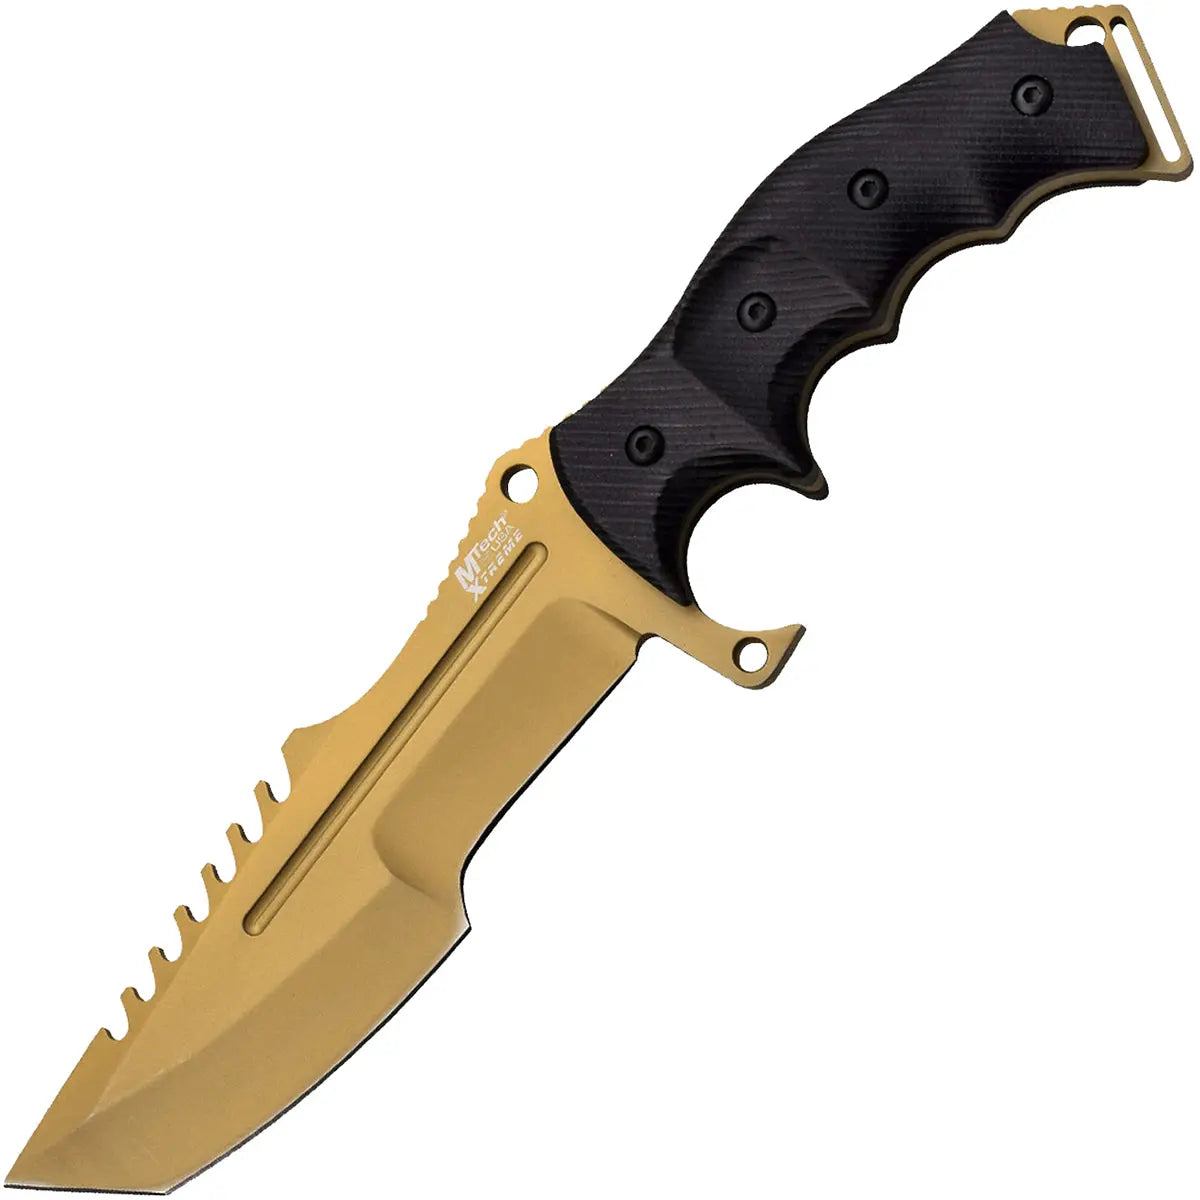 MTech USA Xtreme Tactical Full Tang Tanto Fixed Blade Knife, Gold MX-8054GD M-Tech